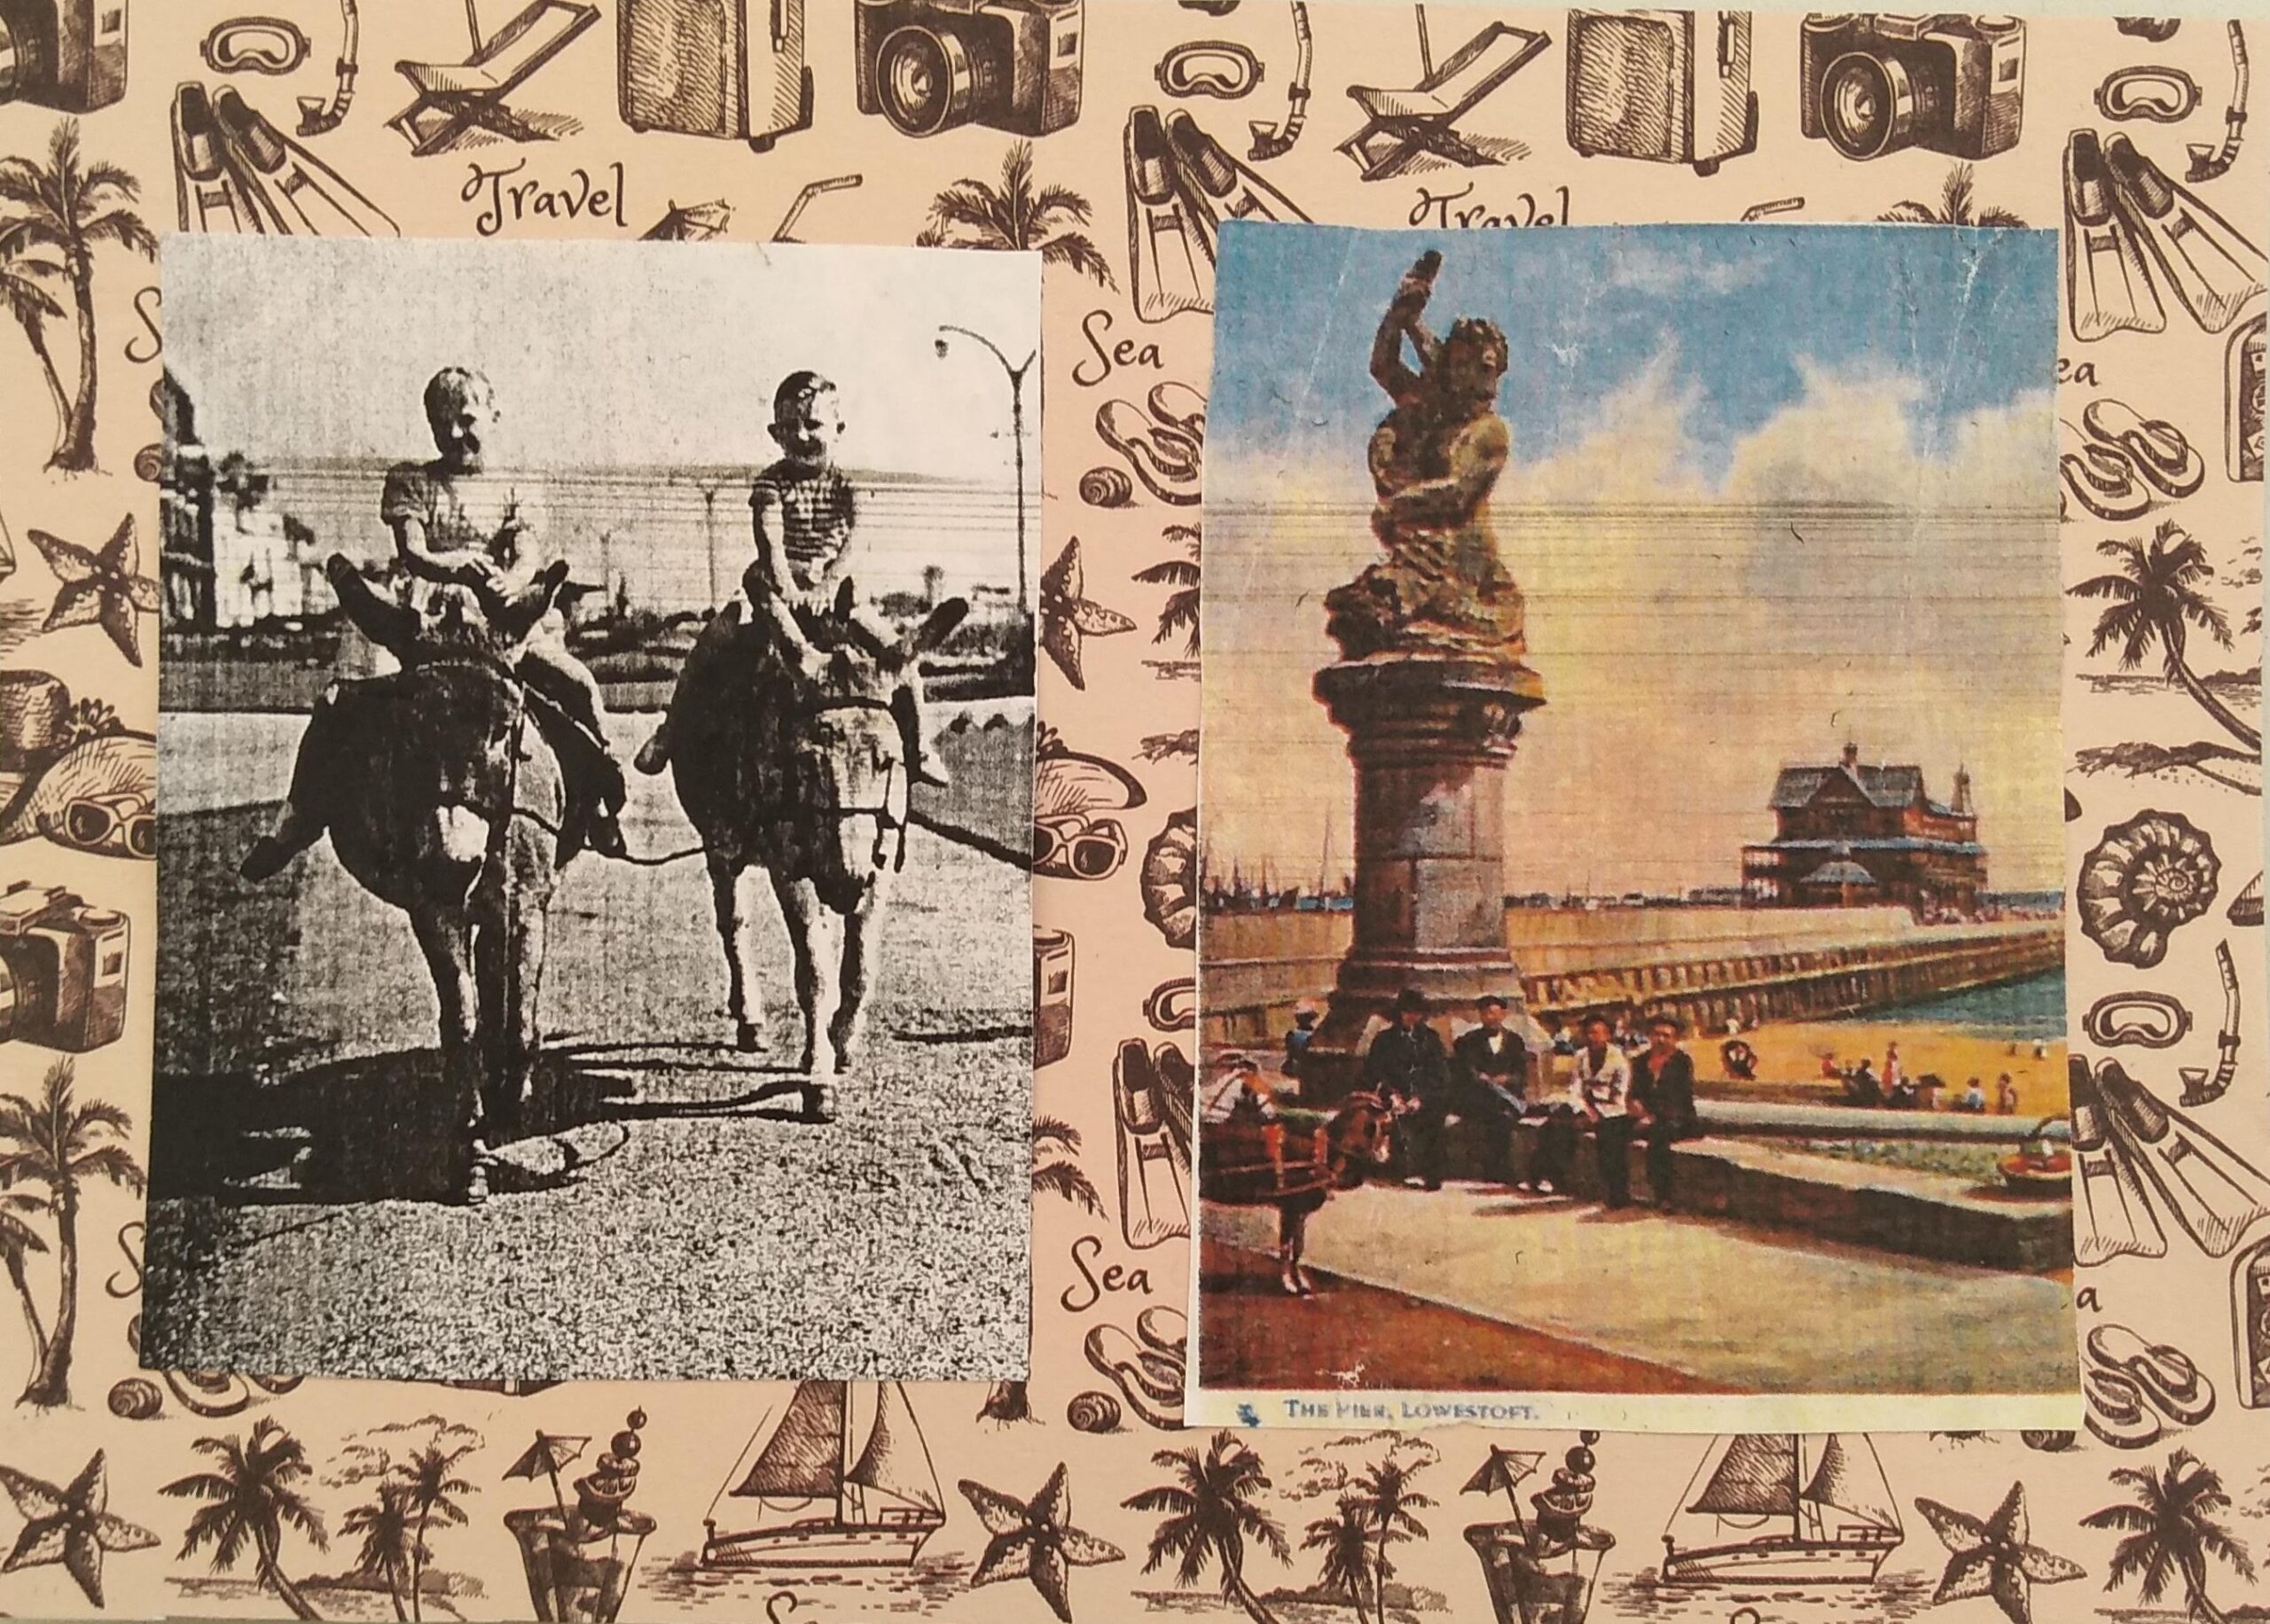 Images from two vintage postcards, one of children riding donkeys and the other of the statue Titan by the pier in Lowestoft, are glued side by side against a background of paper patterned with holiday motifs such as flippers, cameras, palm trees and sailing boats